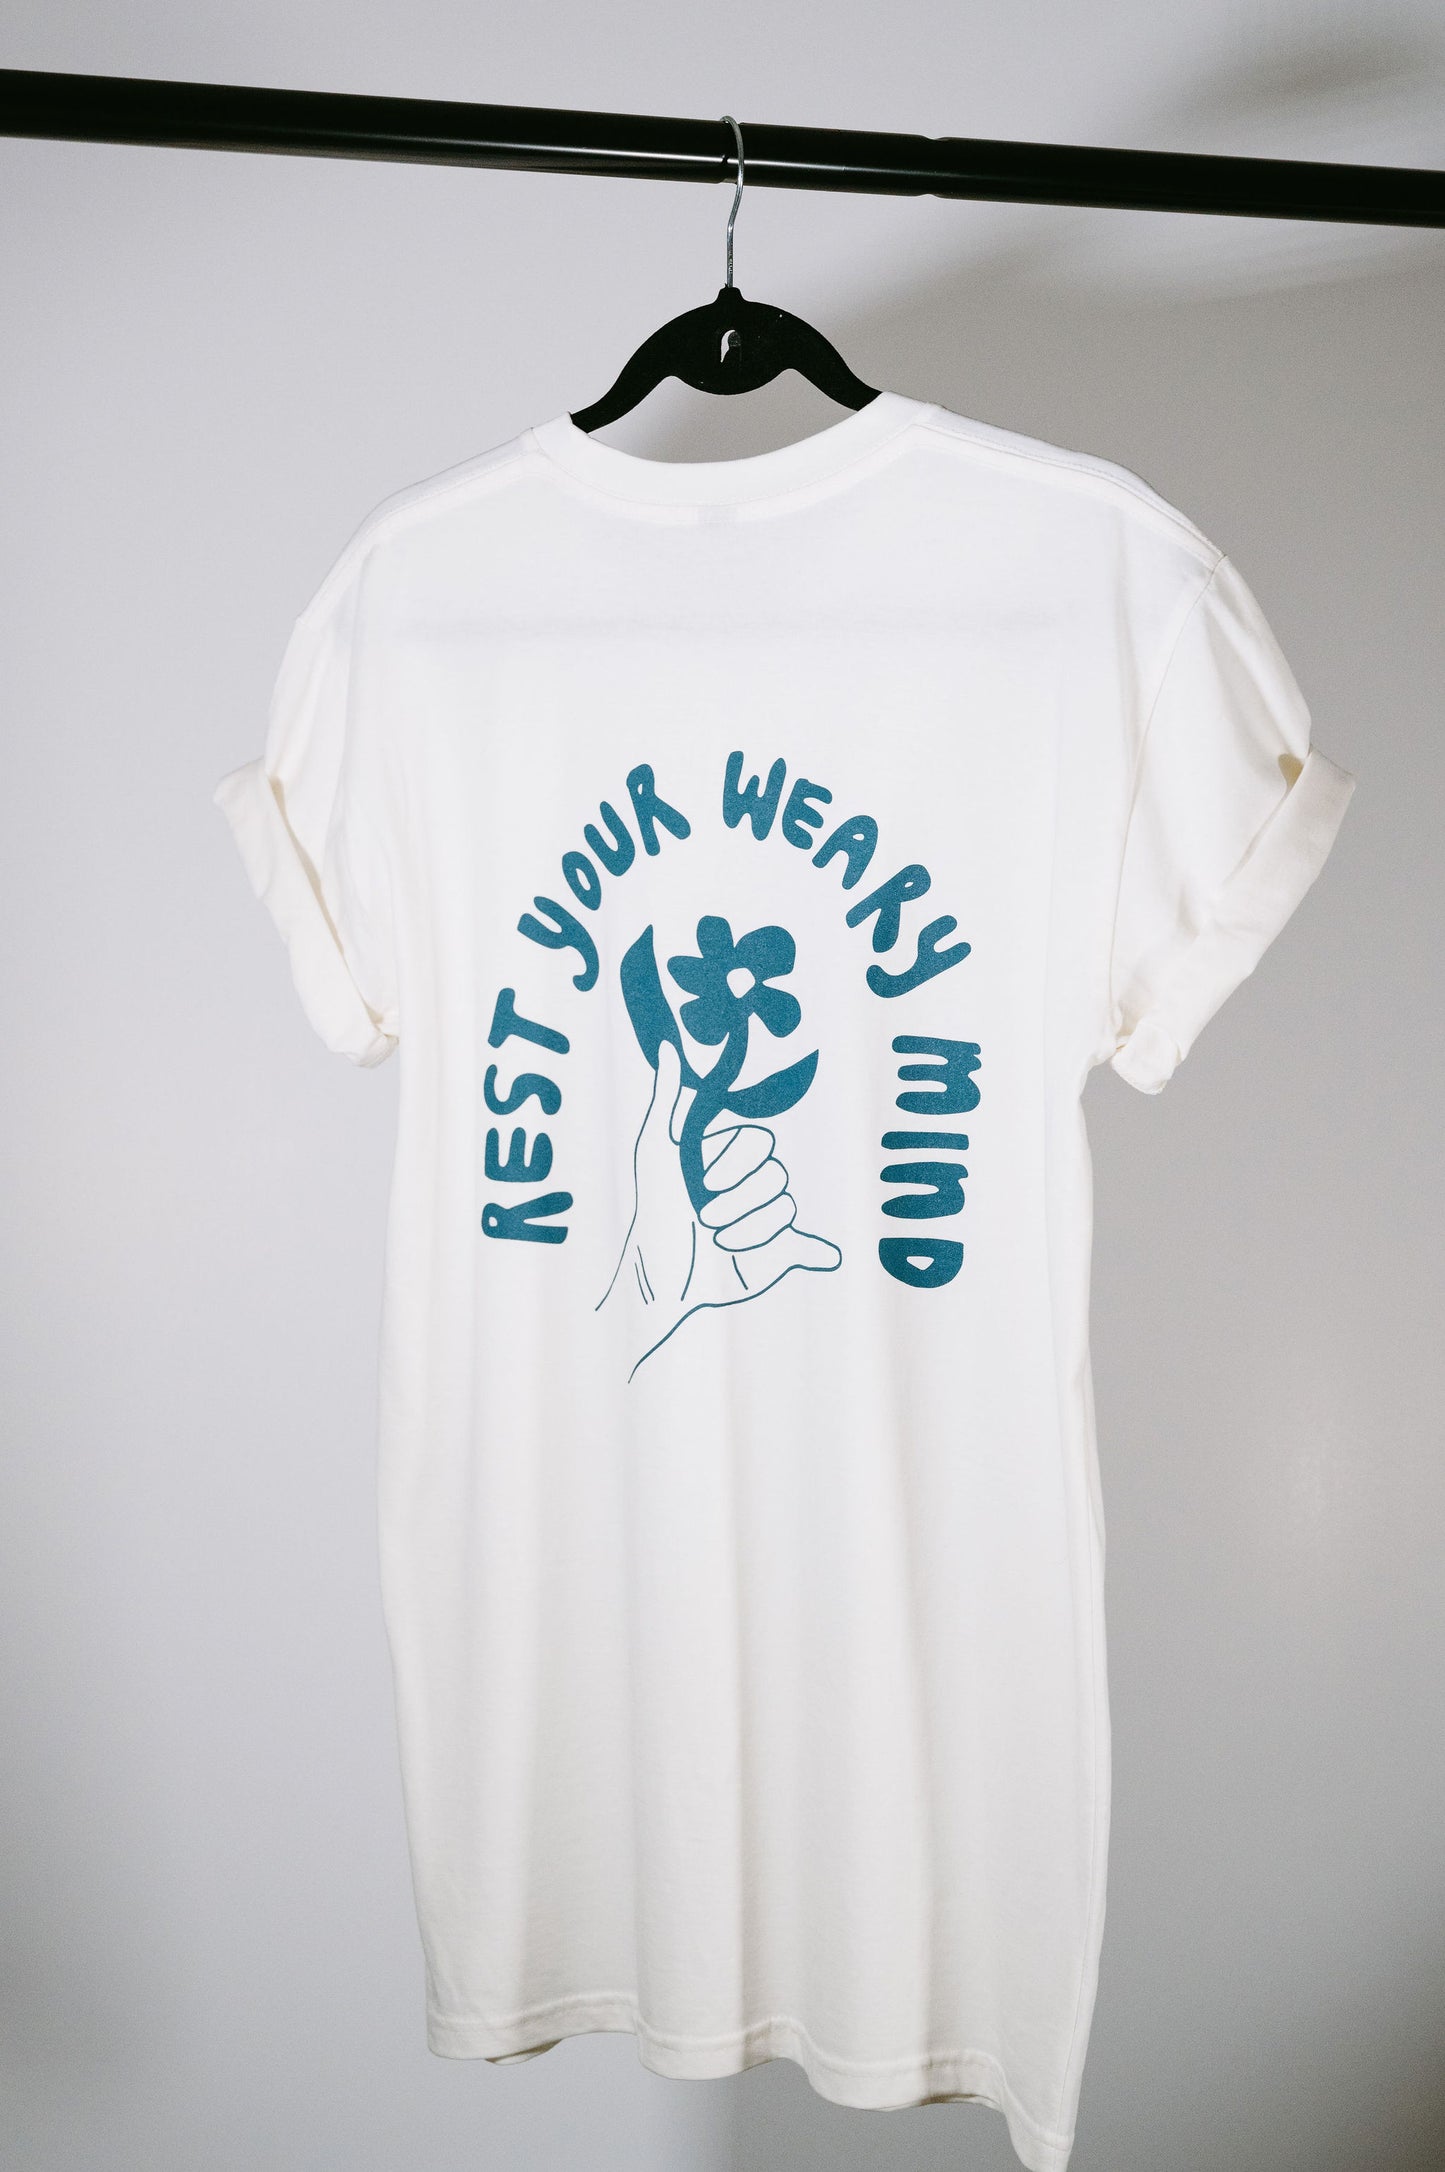 Rest Your Weary Mind Tee